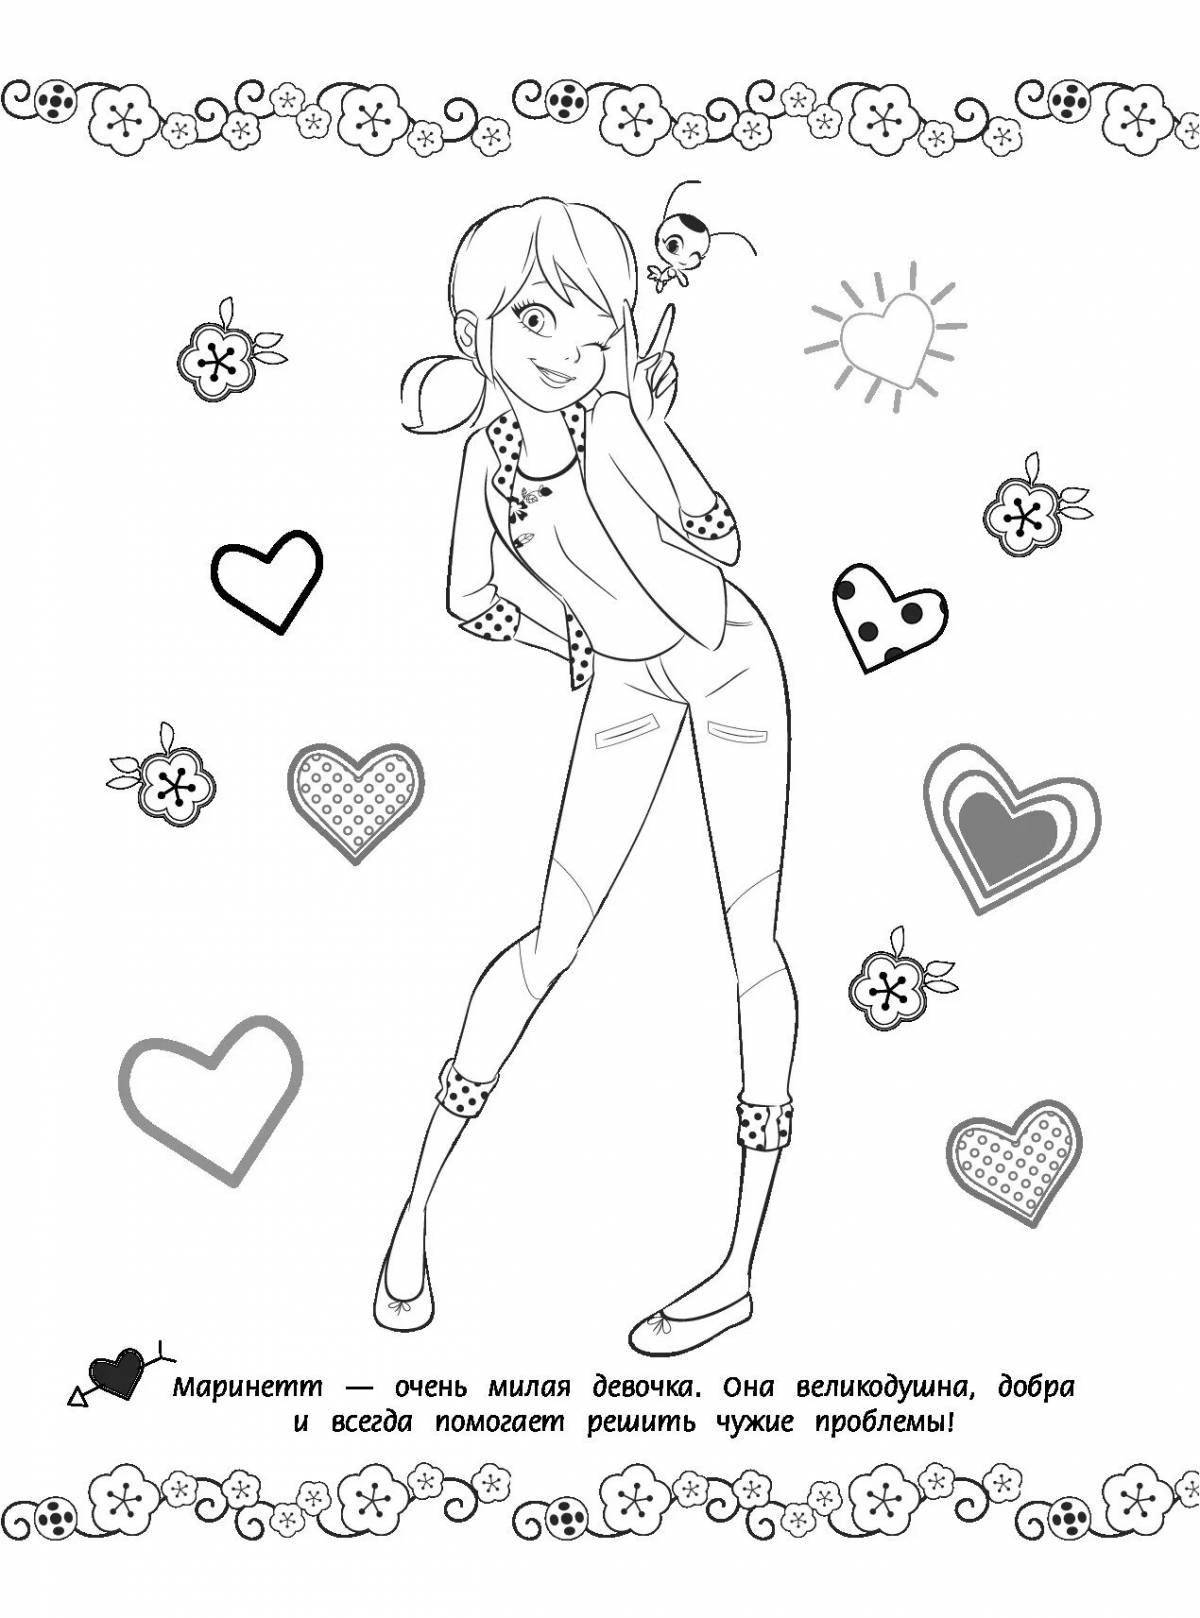 Marinette's amazing coloring book for kids